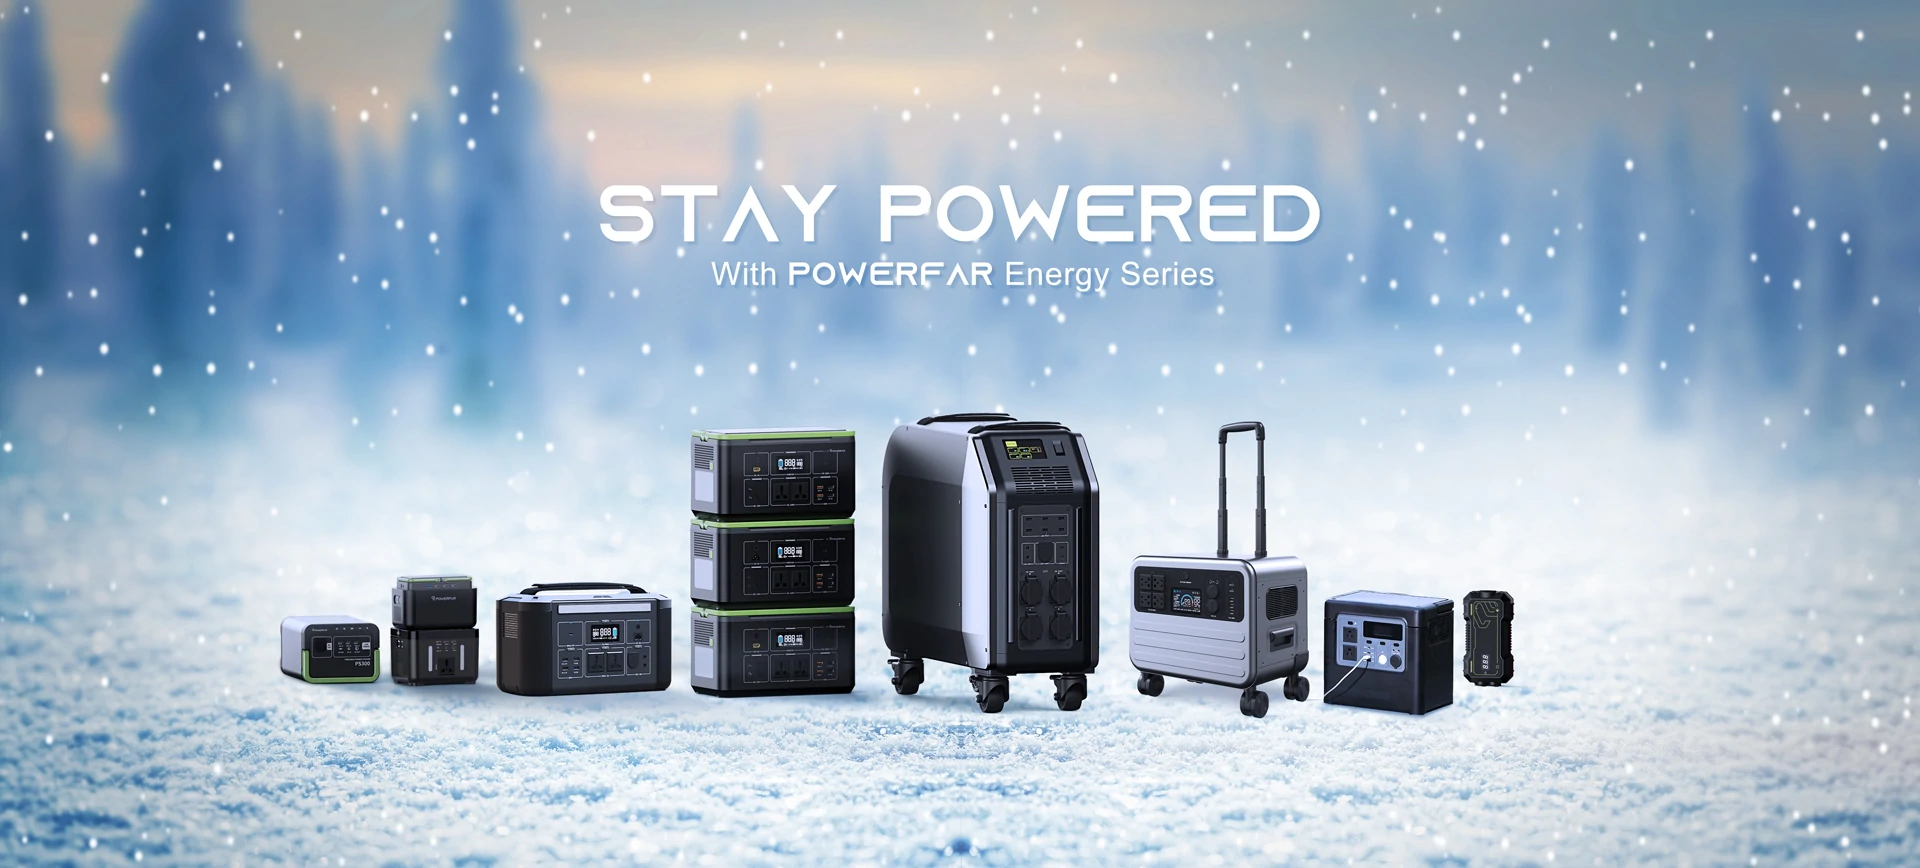 Stay Powered With Powerfar Energy Series